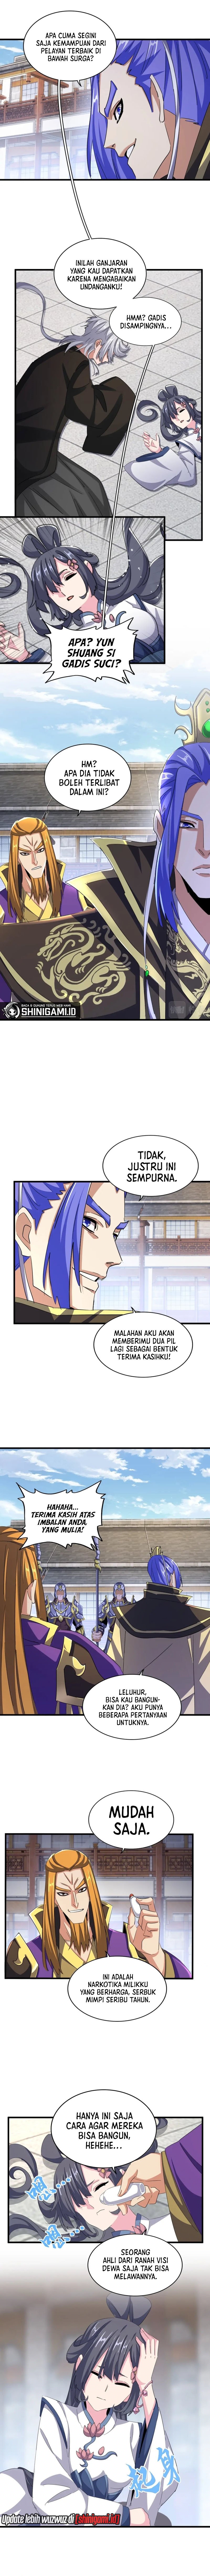 Magic Emperor Chapter 397 Image 4